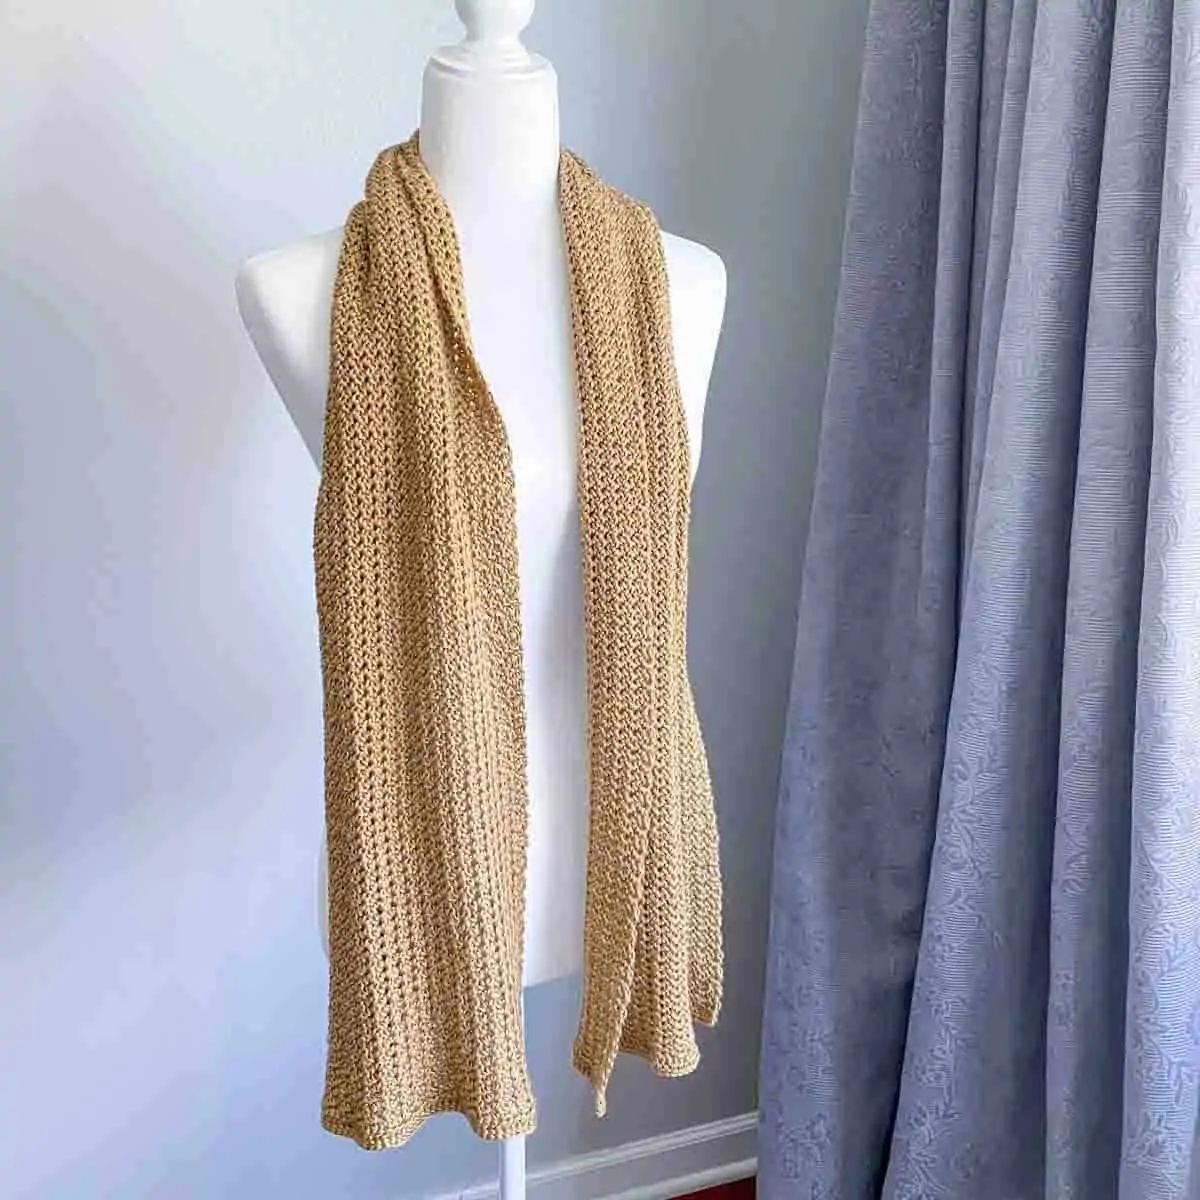 flowy crochet scarf in a yellow golden color draped on the shoulders of a mannequin